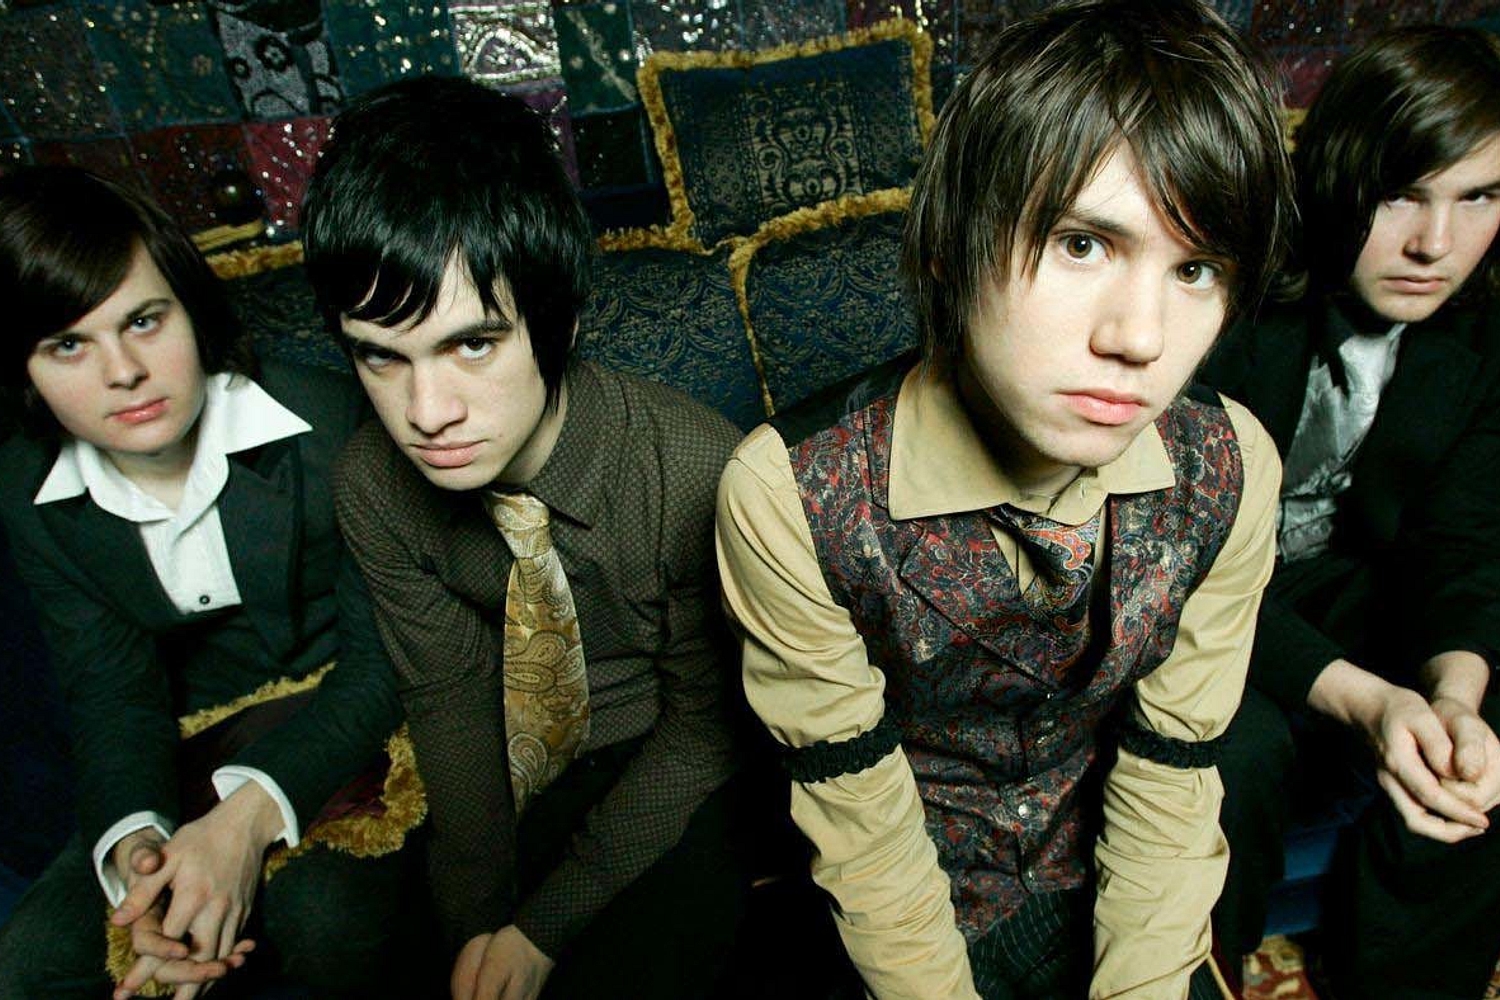 Time to dance: Looking back on Panic! At The Disco's 'A Fever You Can't Sweat Out'